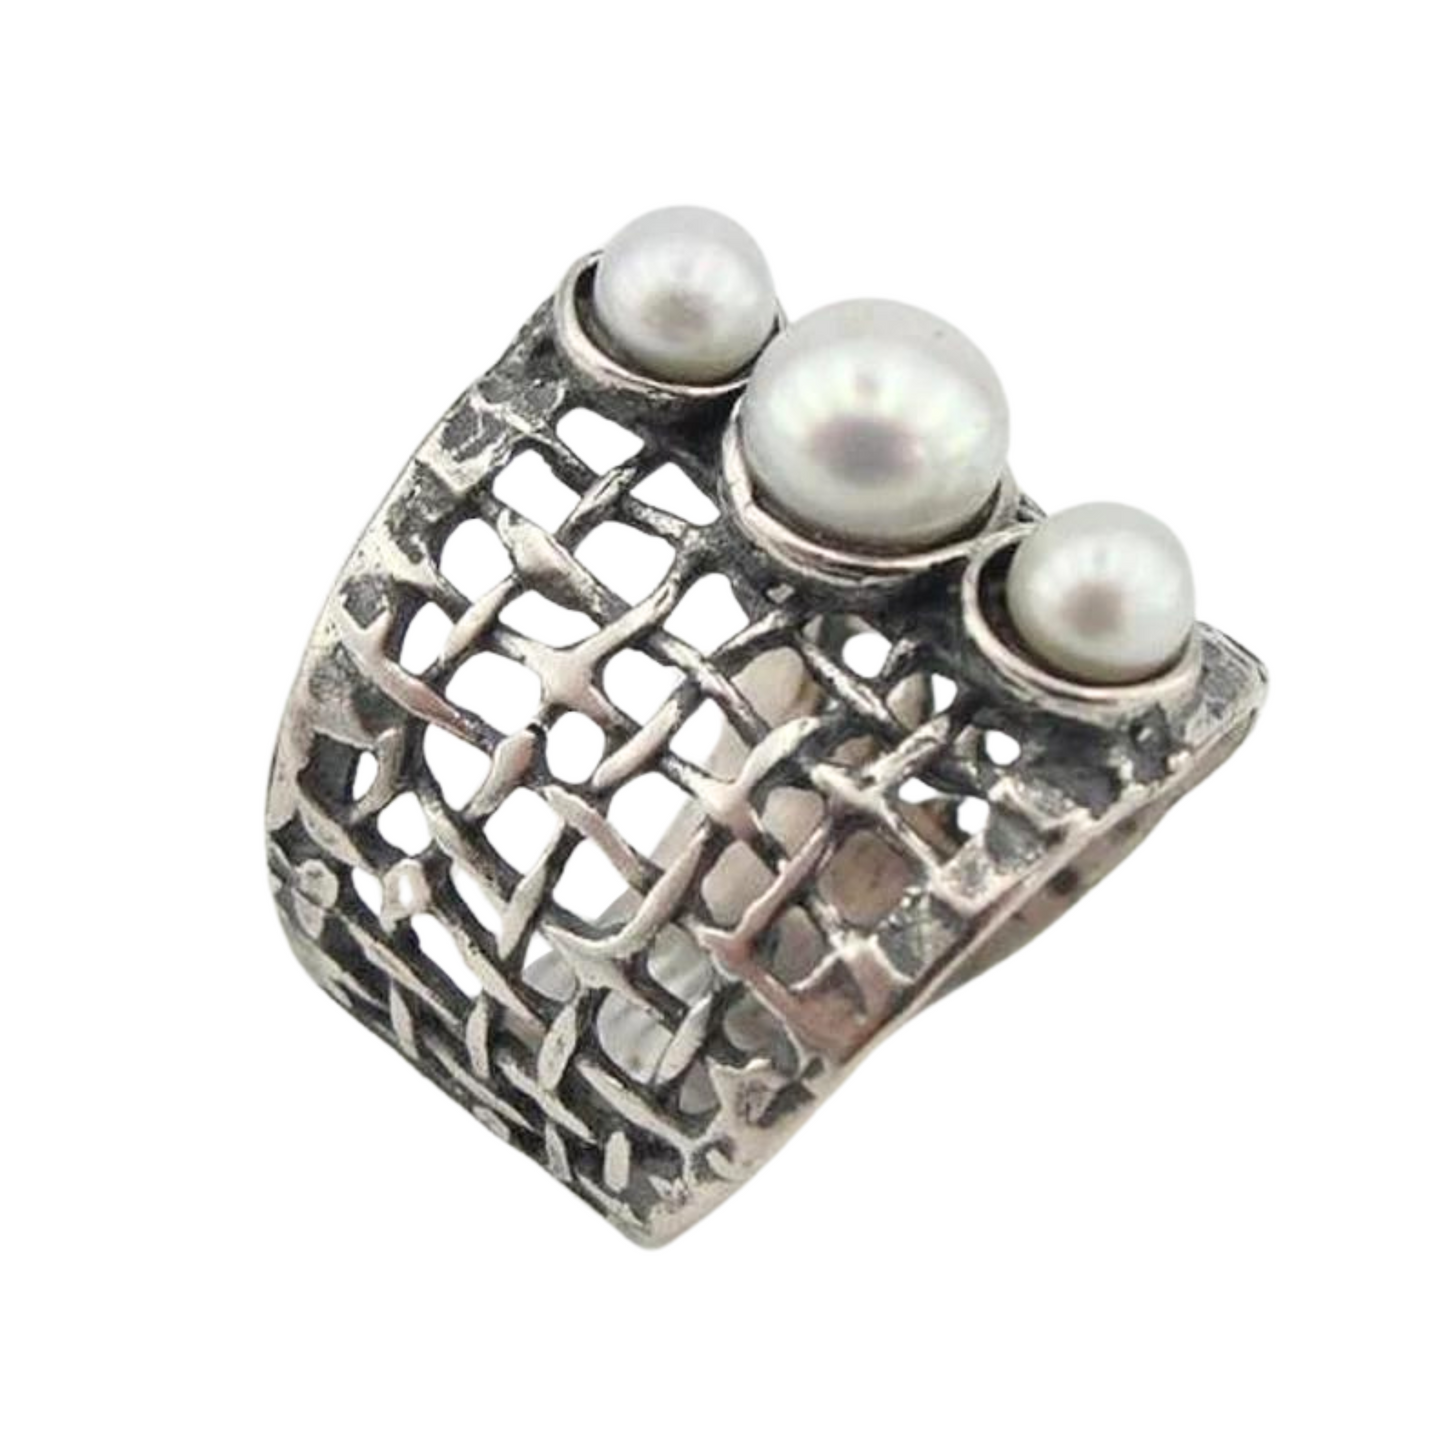 Net sterling silver Ring With Natural pearls, Blacked Silver